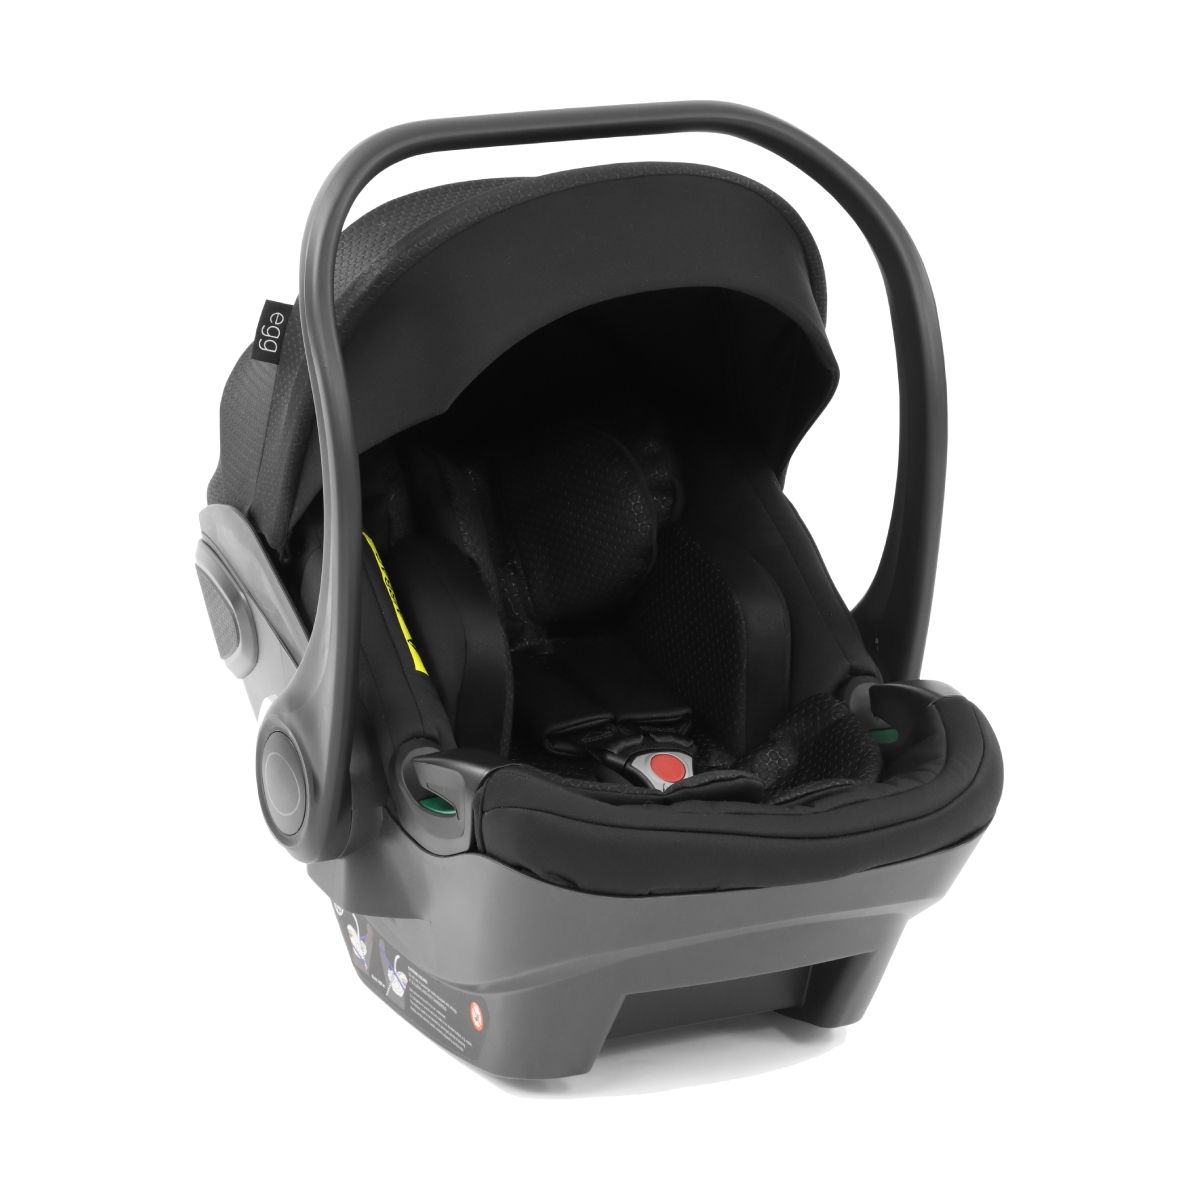 egg 2 Special Edition Shell Car Seat